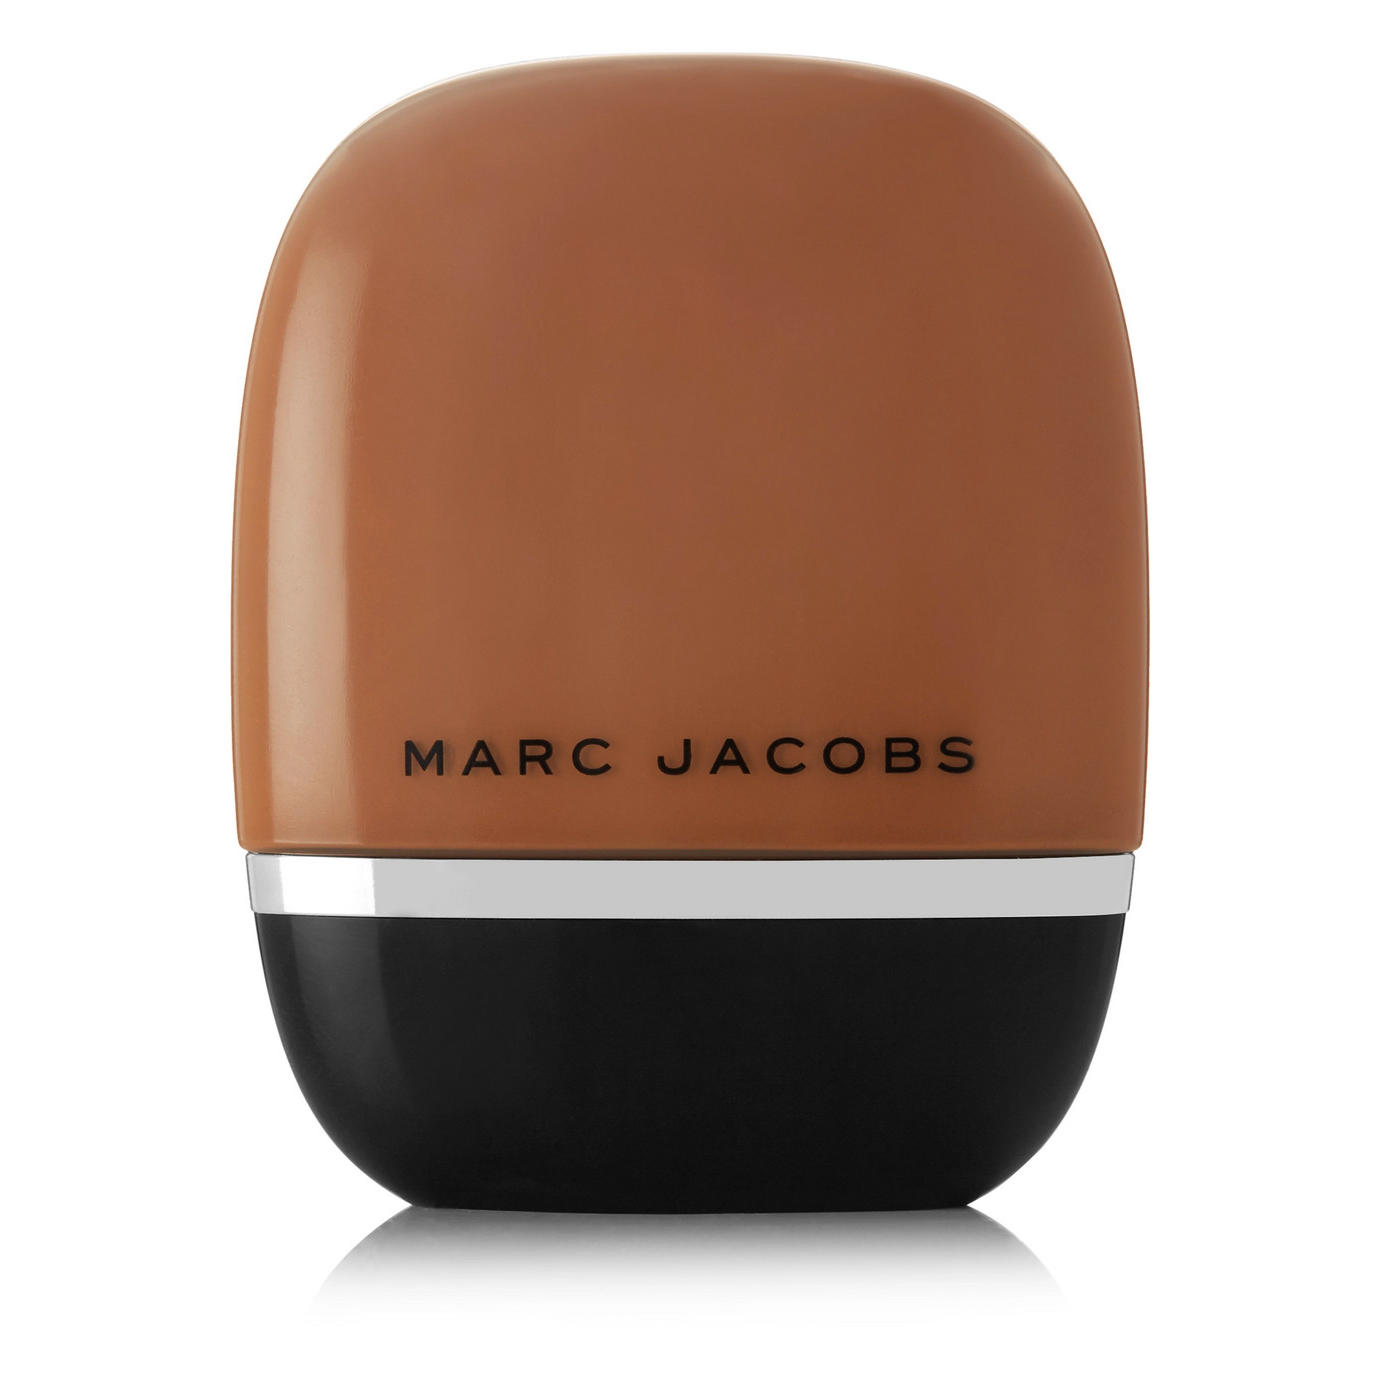 Marc Jacobs Shameless Youthful-Look 24H Foundation Tan R490